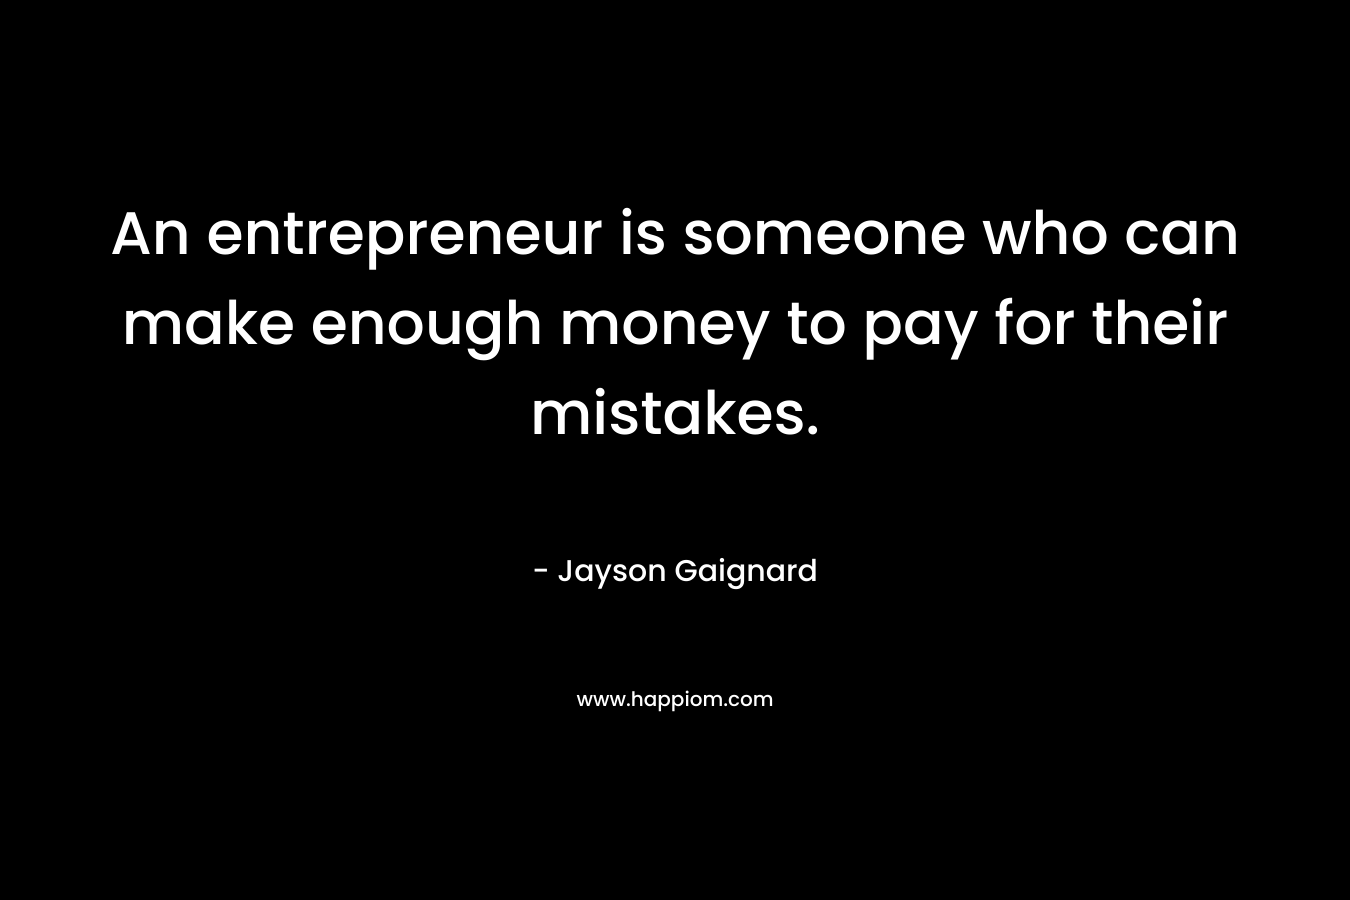 An entrepreneur is someone who can make enough money to pay for their mistakes. – Jayson Gaignard